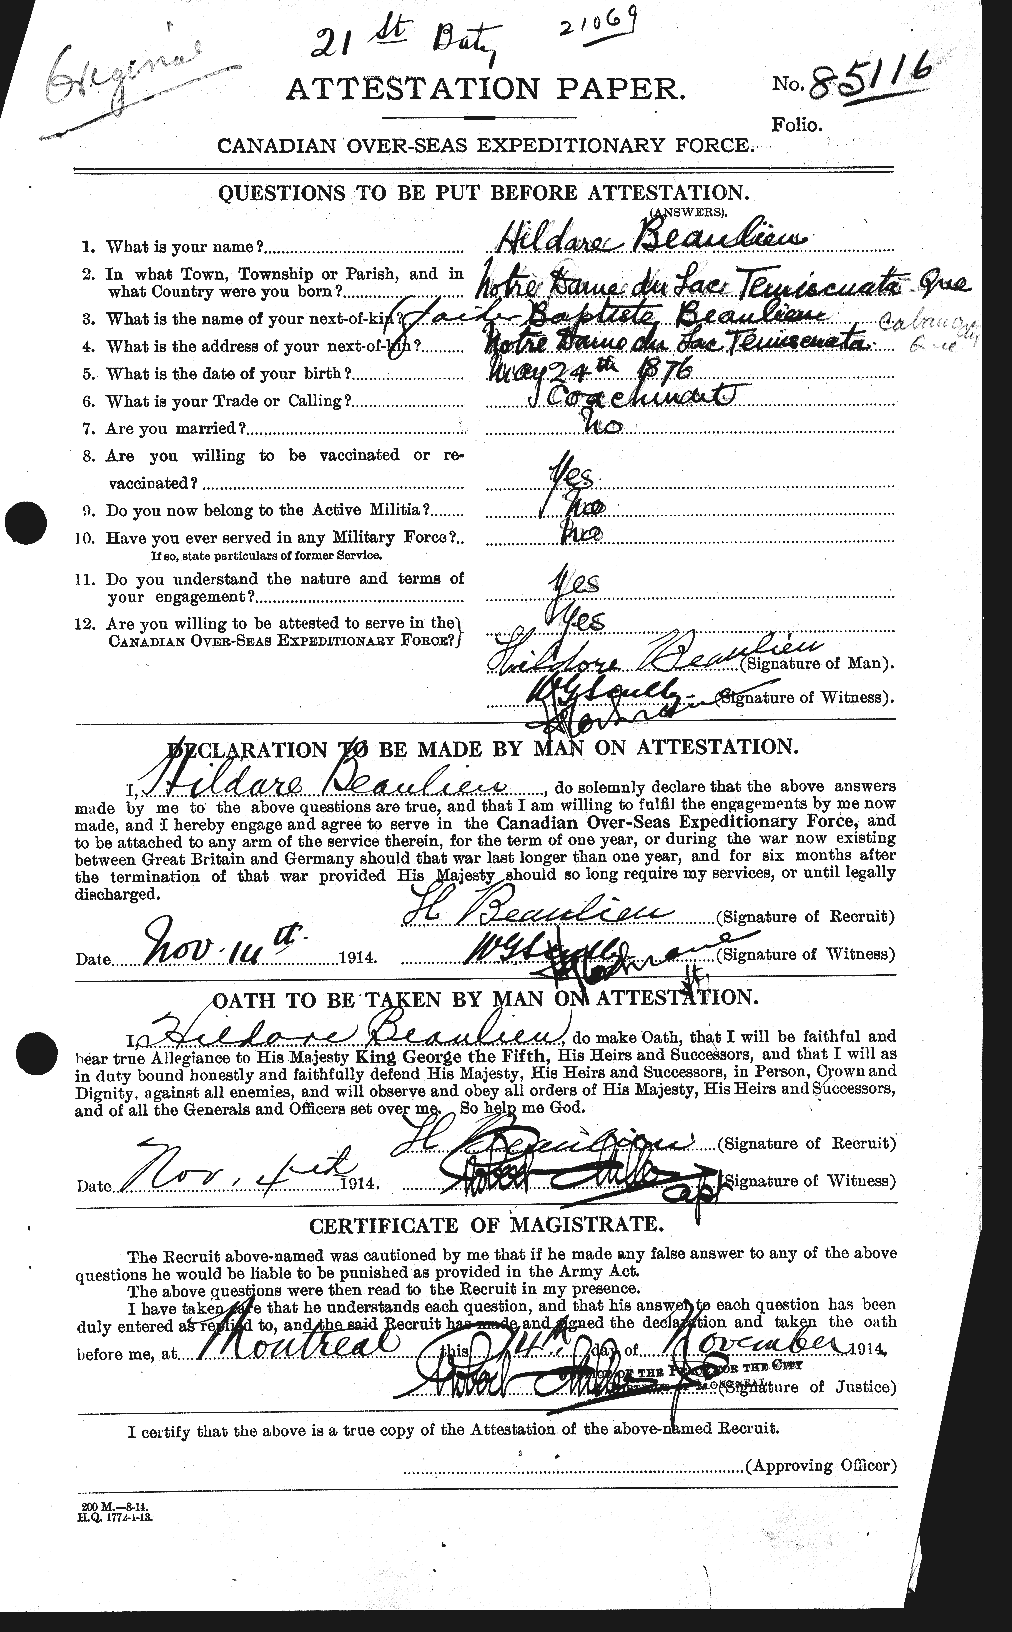 Personnel Records of the First World War - CEF 231523a